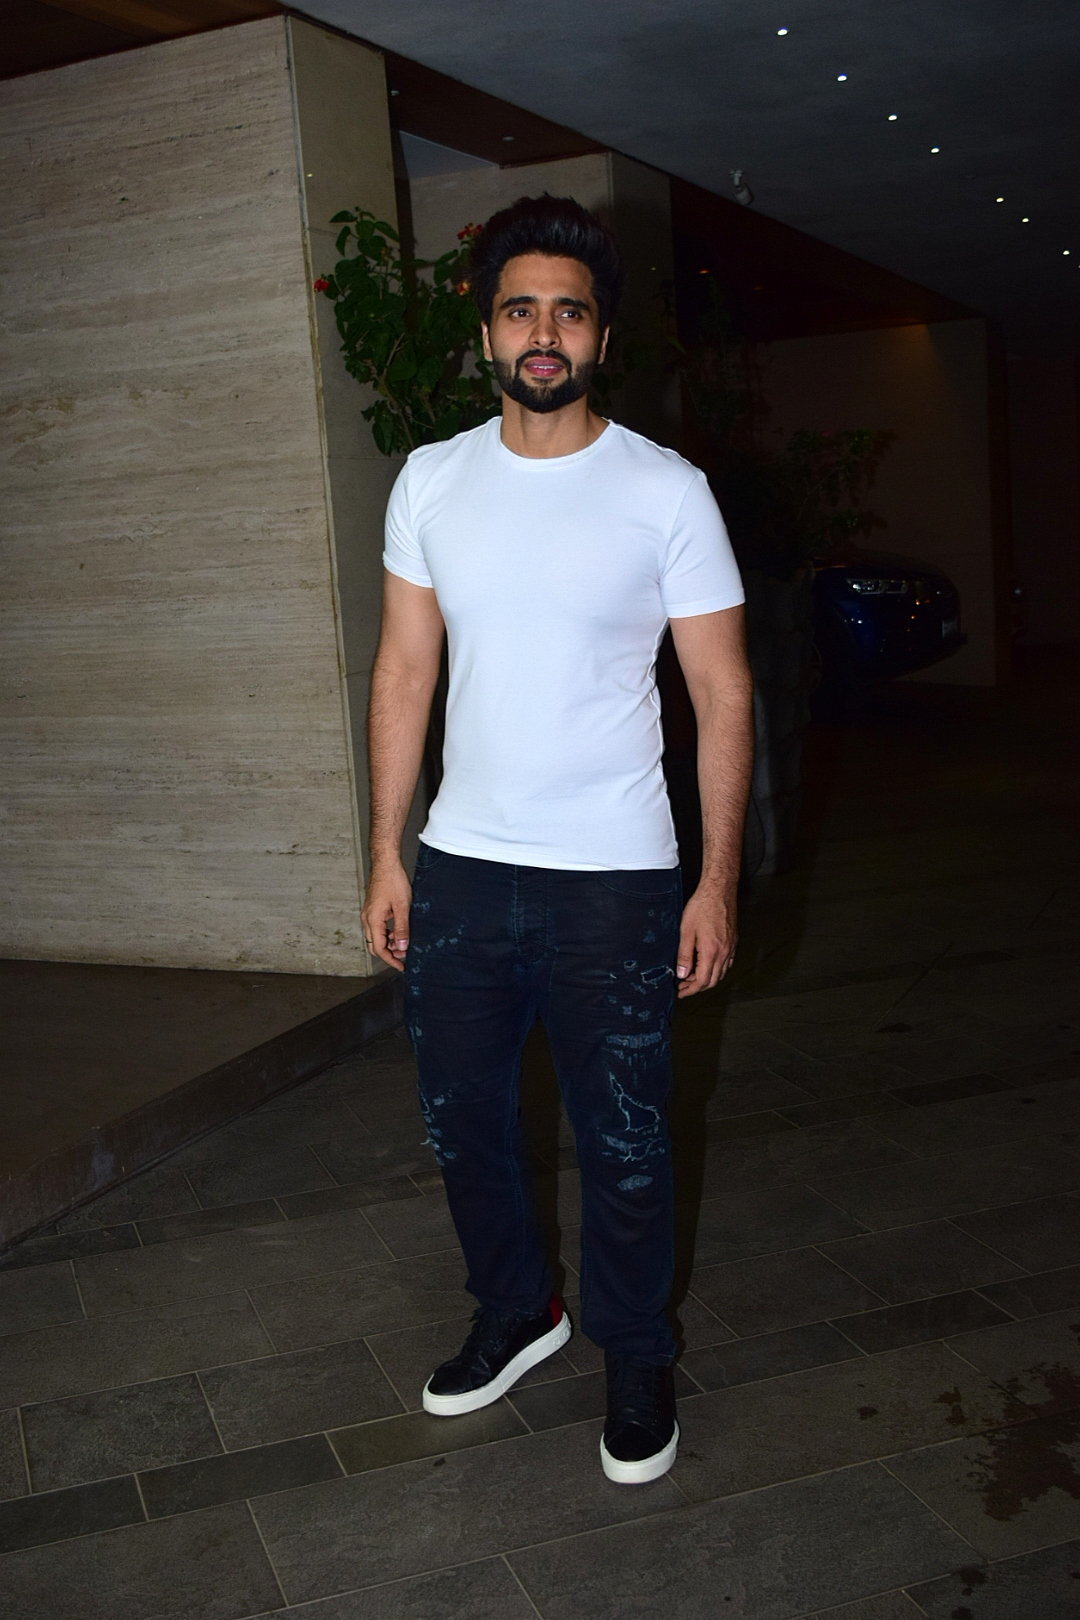 Jackky Bhagnani - Photos: Coolie No 1 Wrap Up Party At Jackky Bhagnani's House | Picture 1724269